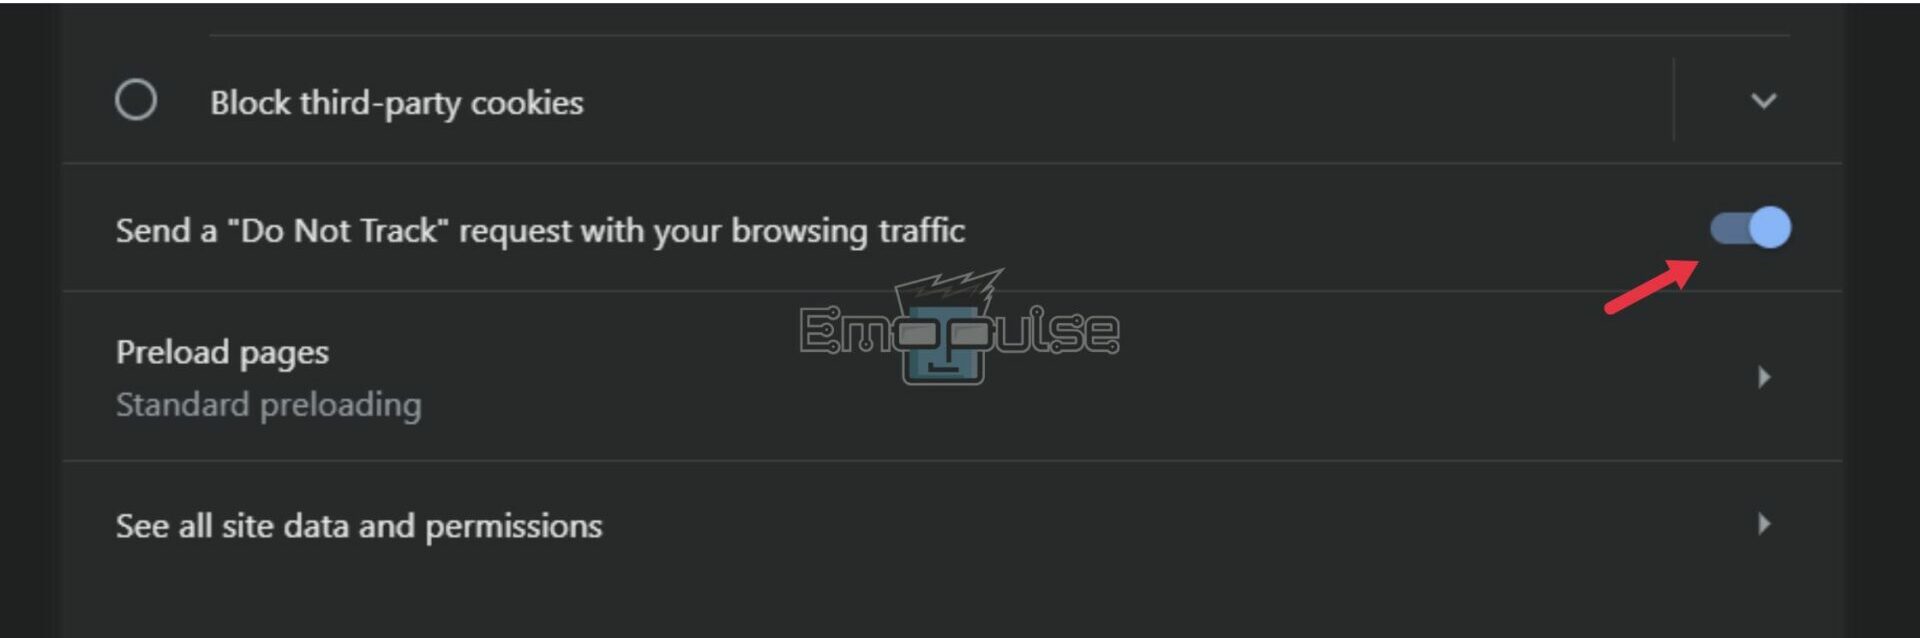 Do Not Track Toggle Switch in Chrome Settings